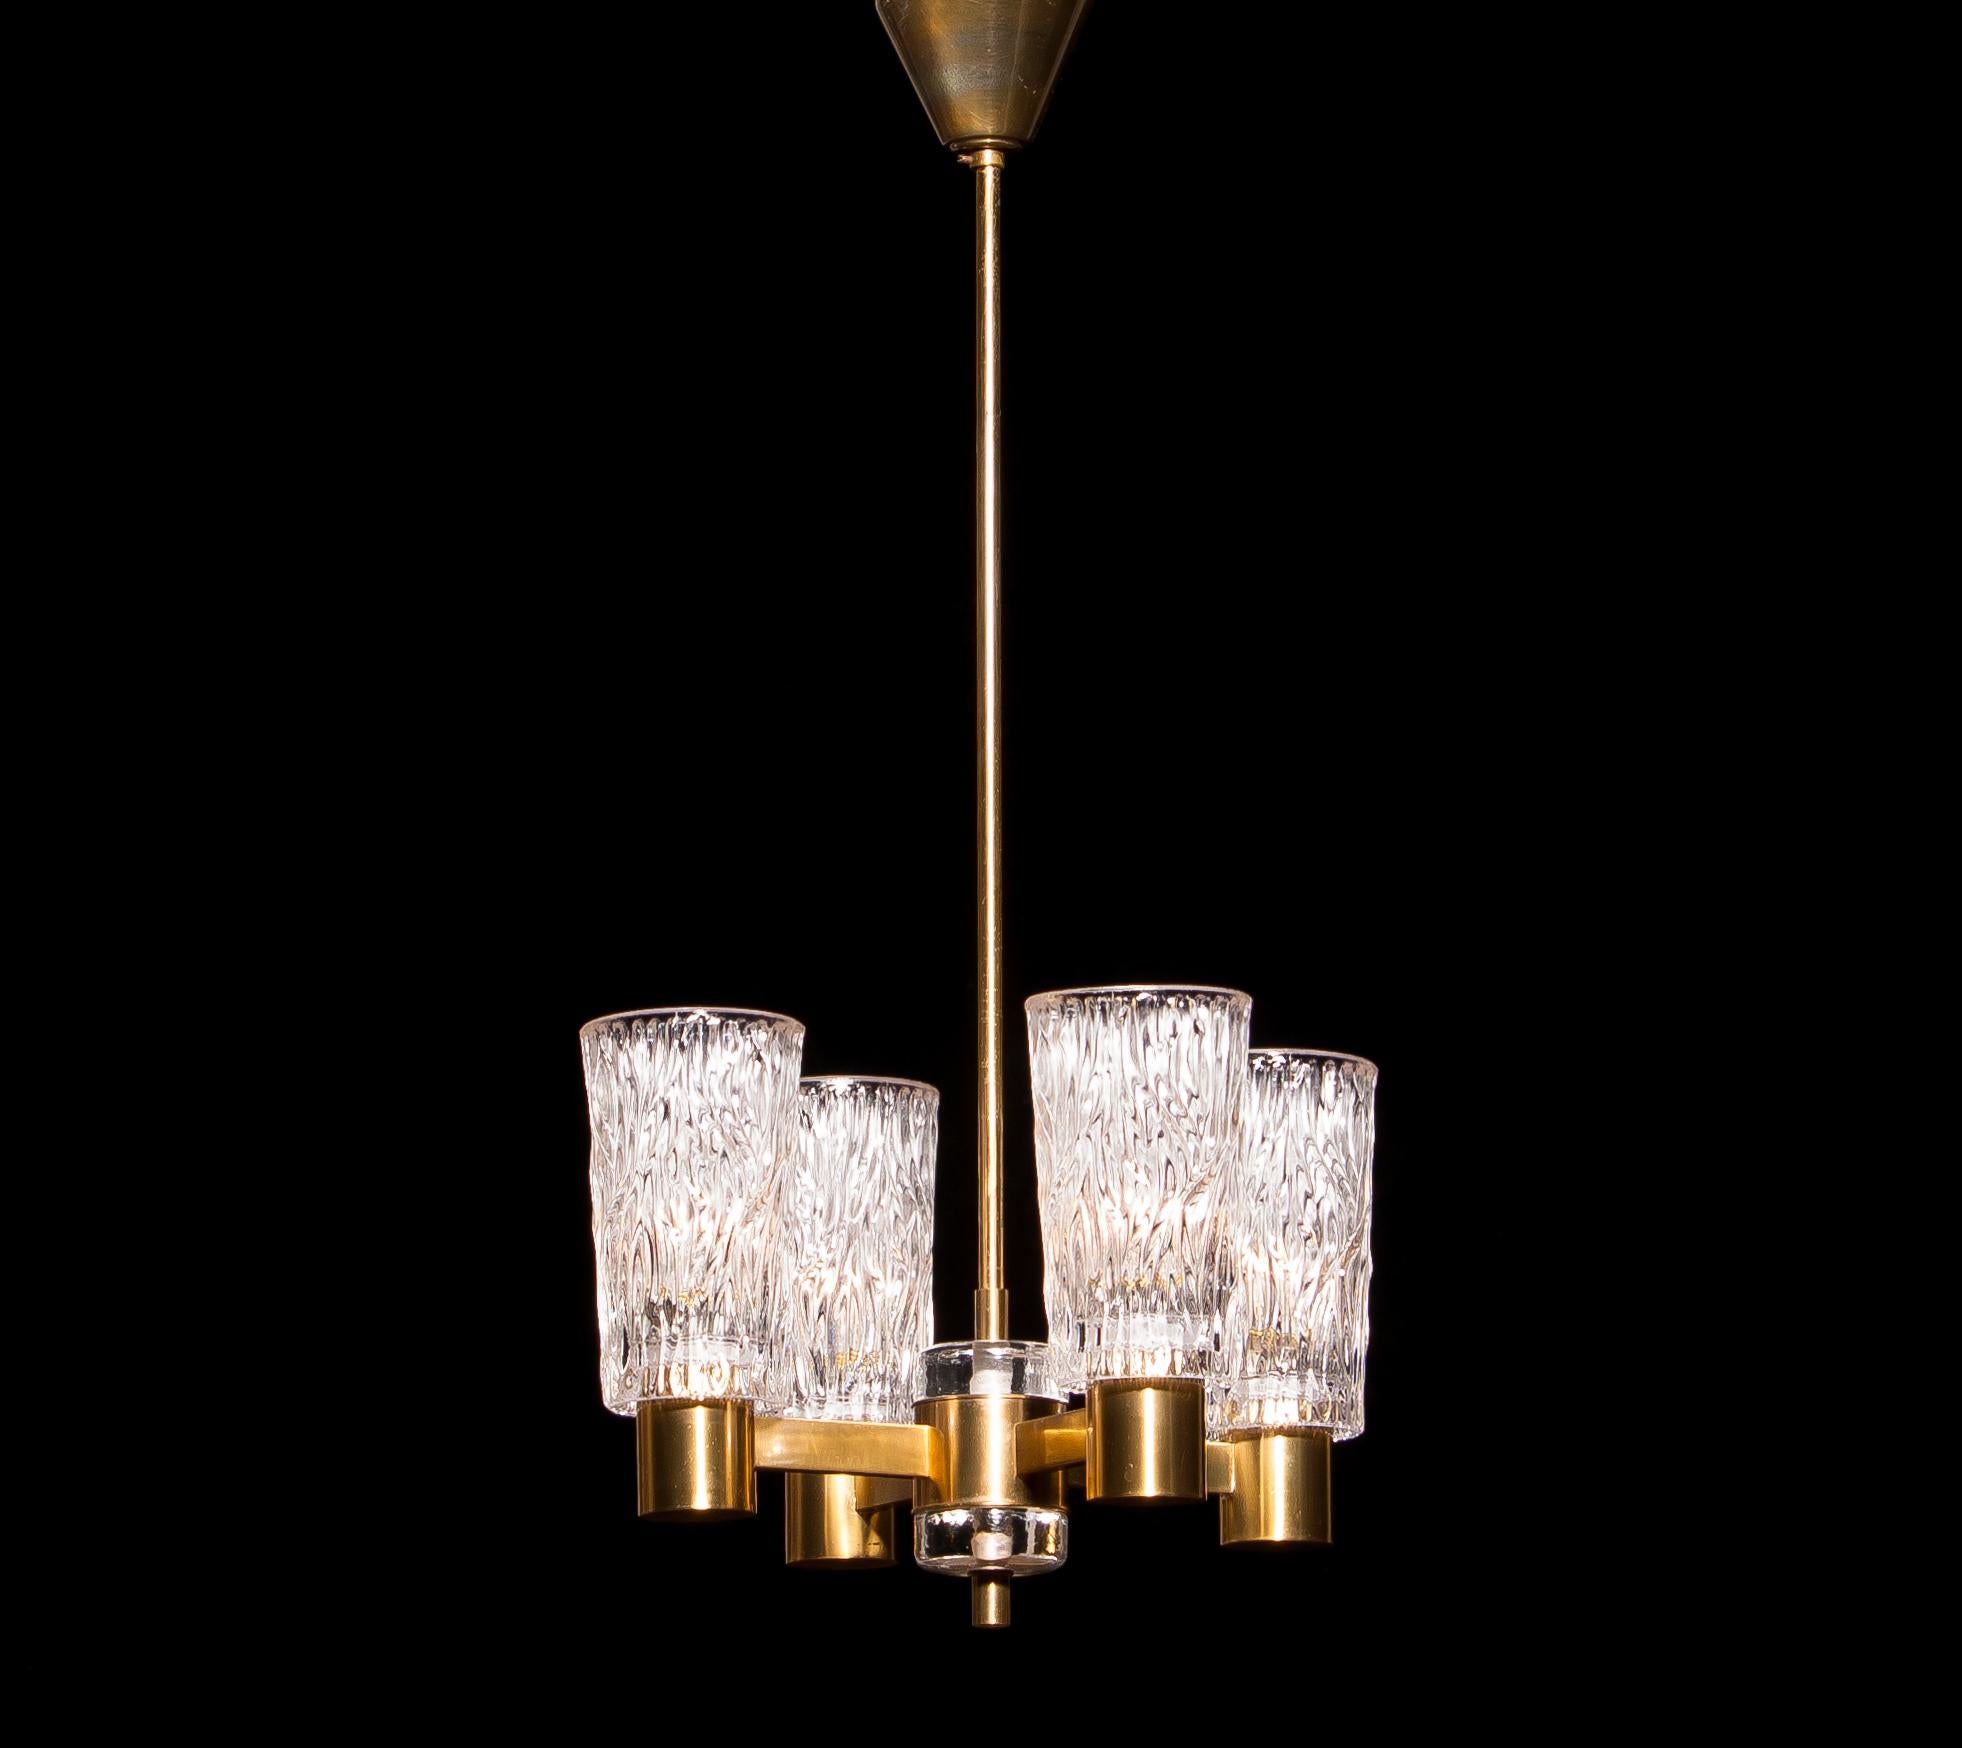 Beautiful chandelier made by Orrefors, Sweden.
This lamp is made of brass with four clear crystal glass shades.
It is in a lovely condition.
Period: 1950s.
Dimensions: H 65 cm, ø 35 cm.